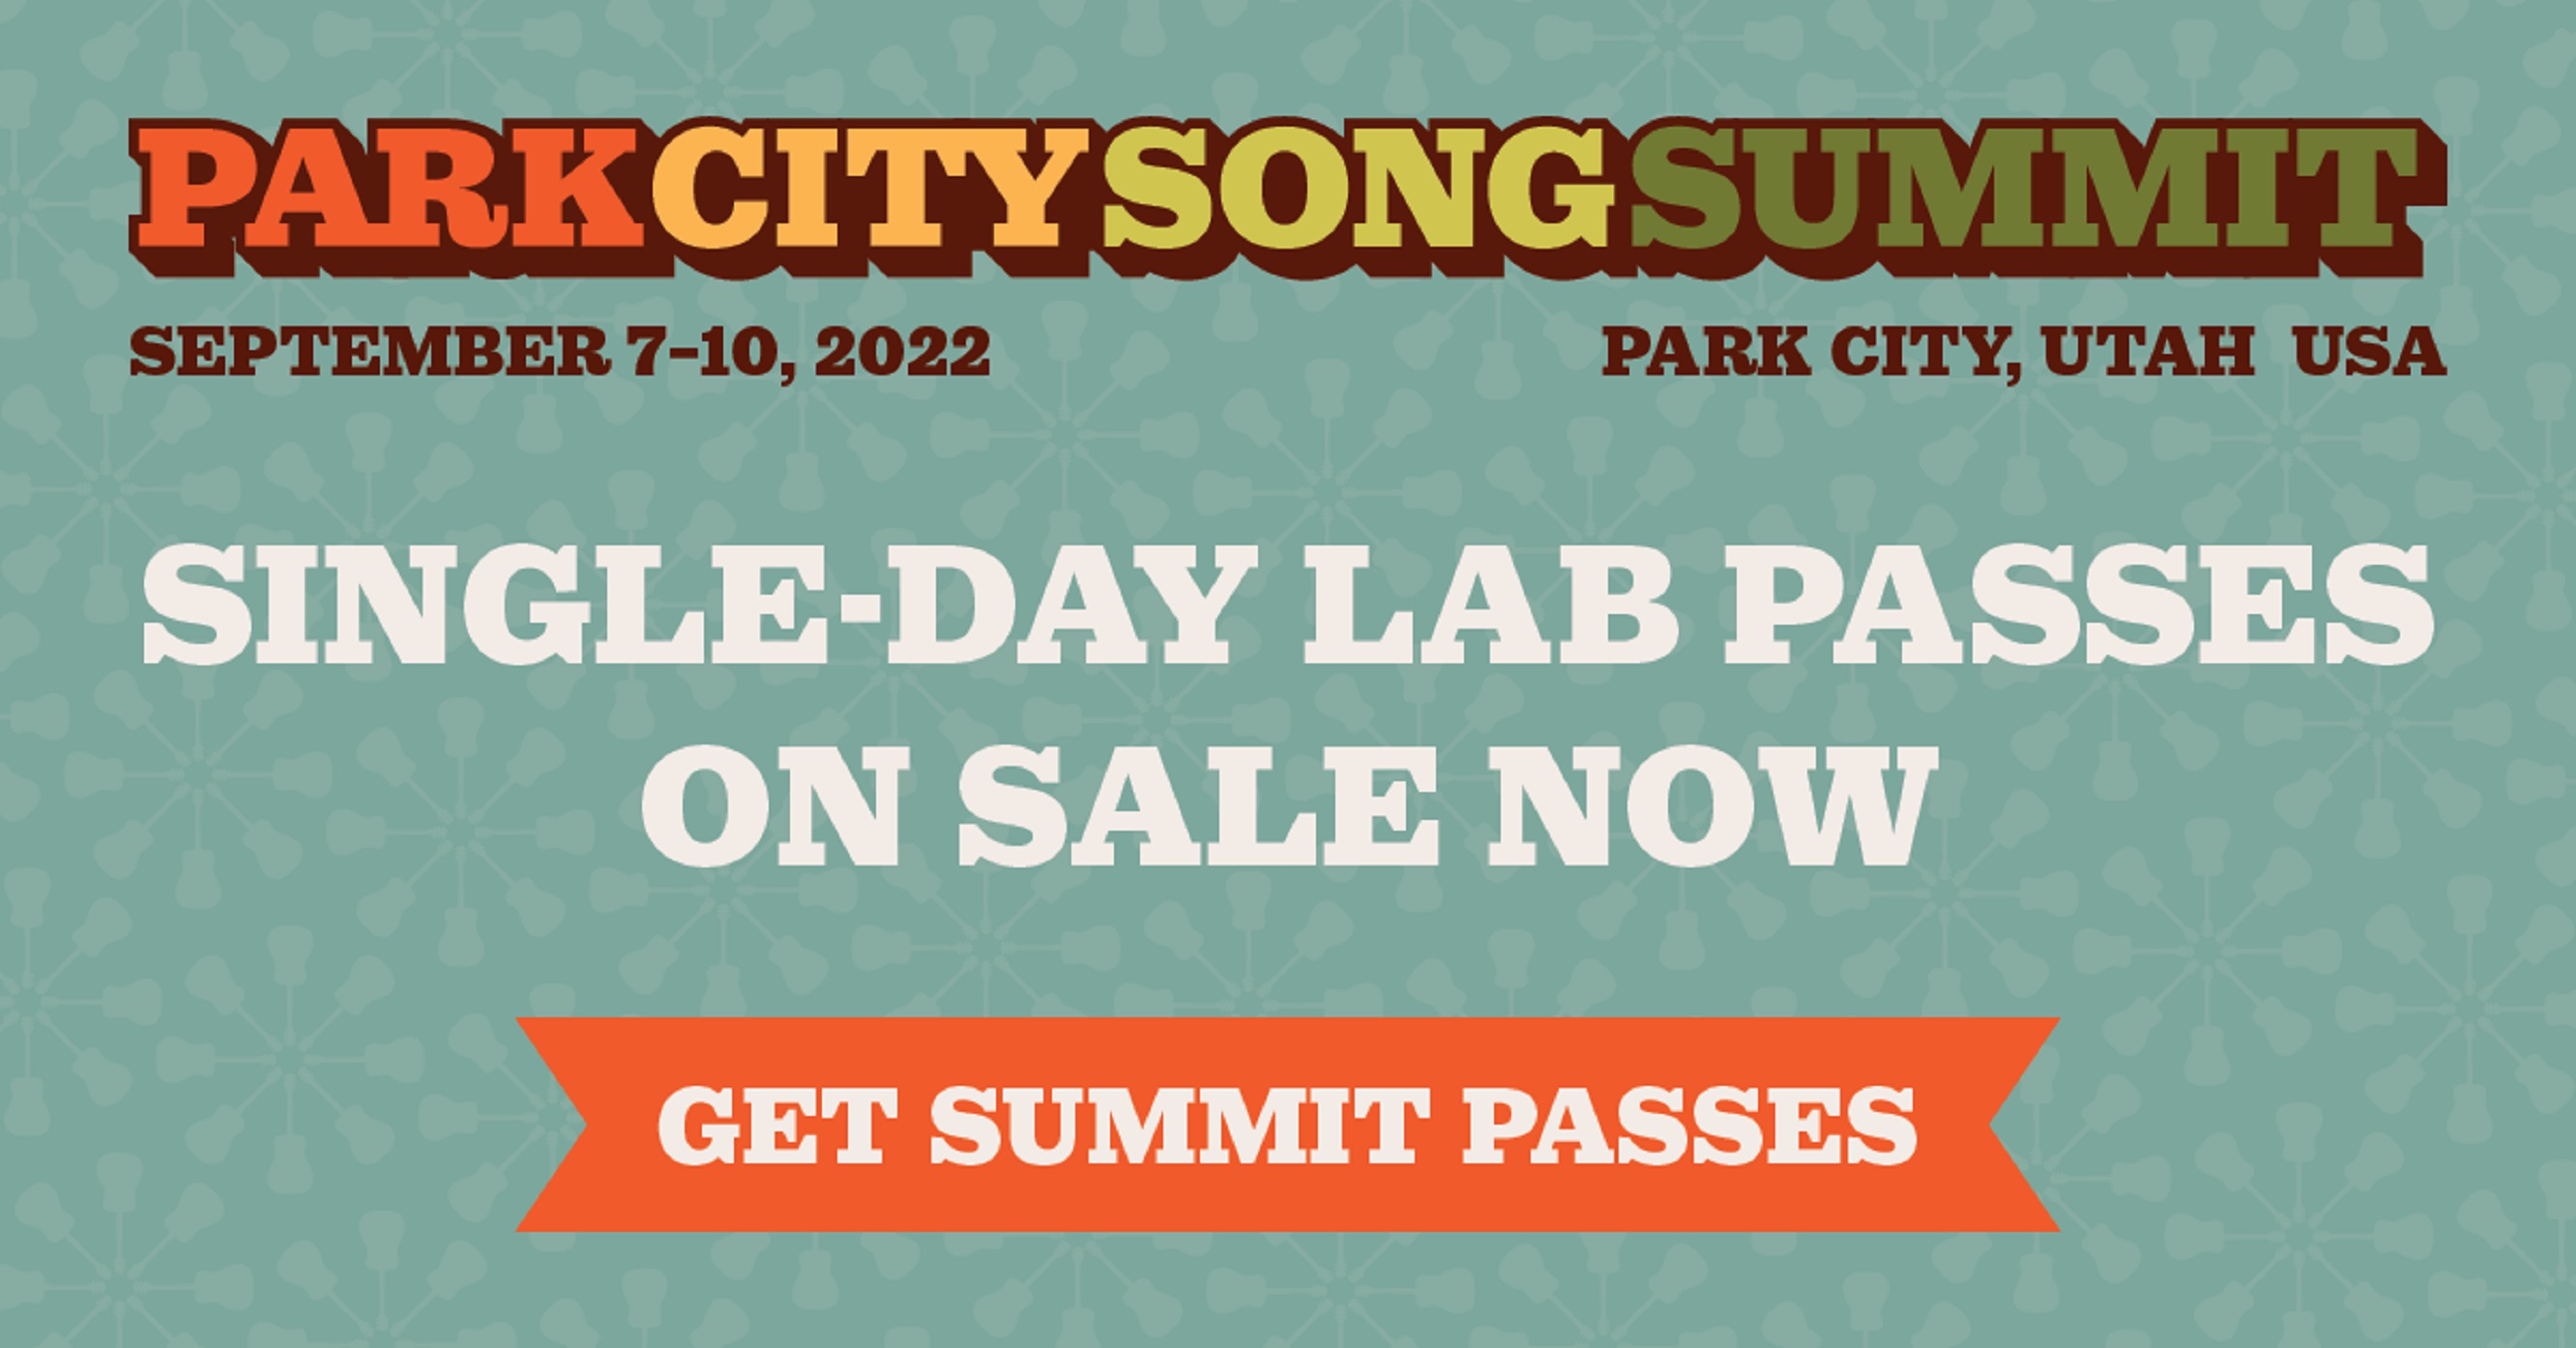 Park City Song Summit’s Live Show Tickets and Lab Passes Are On Sale Now